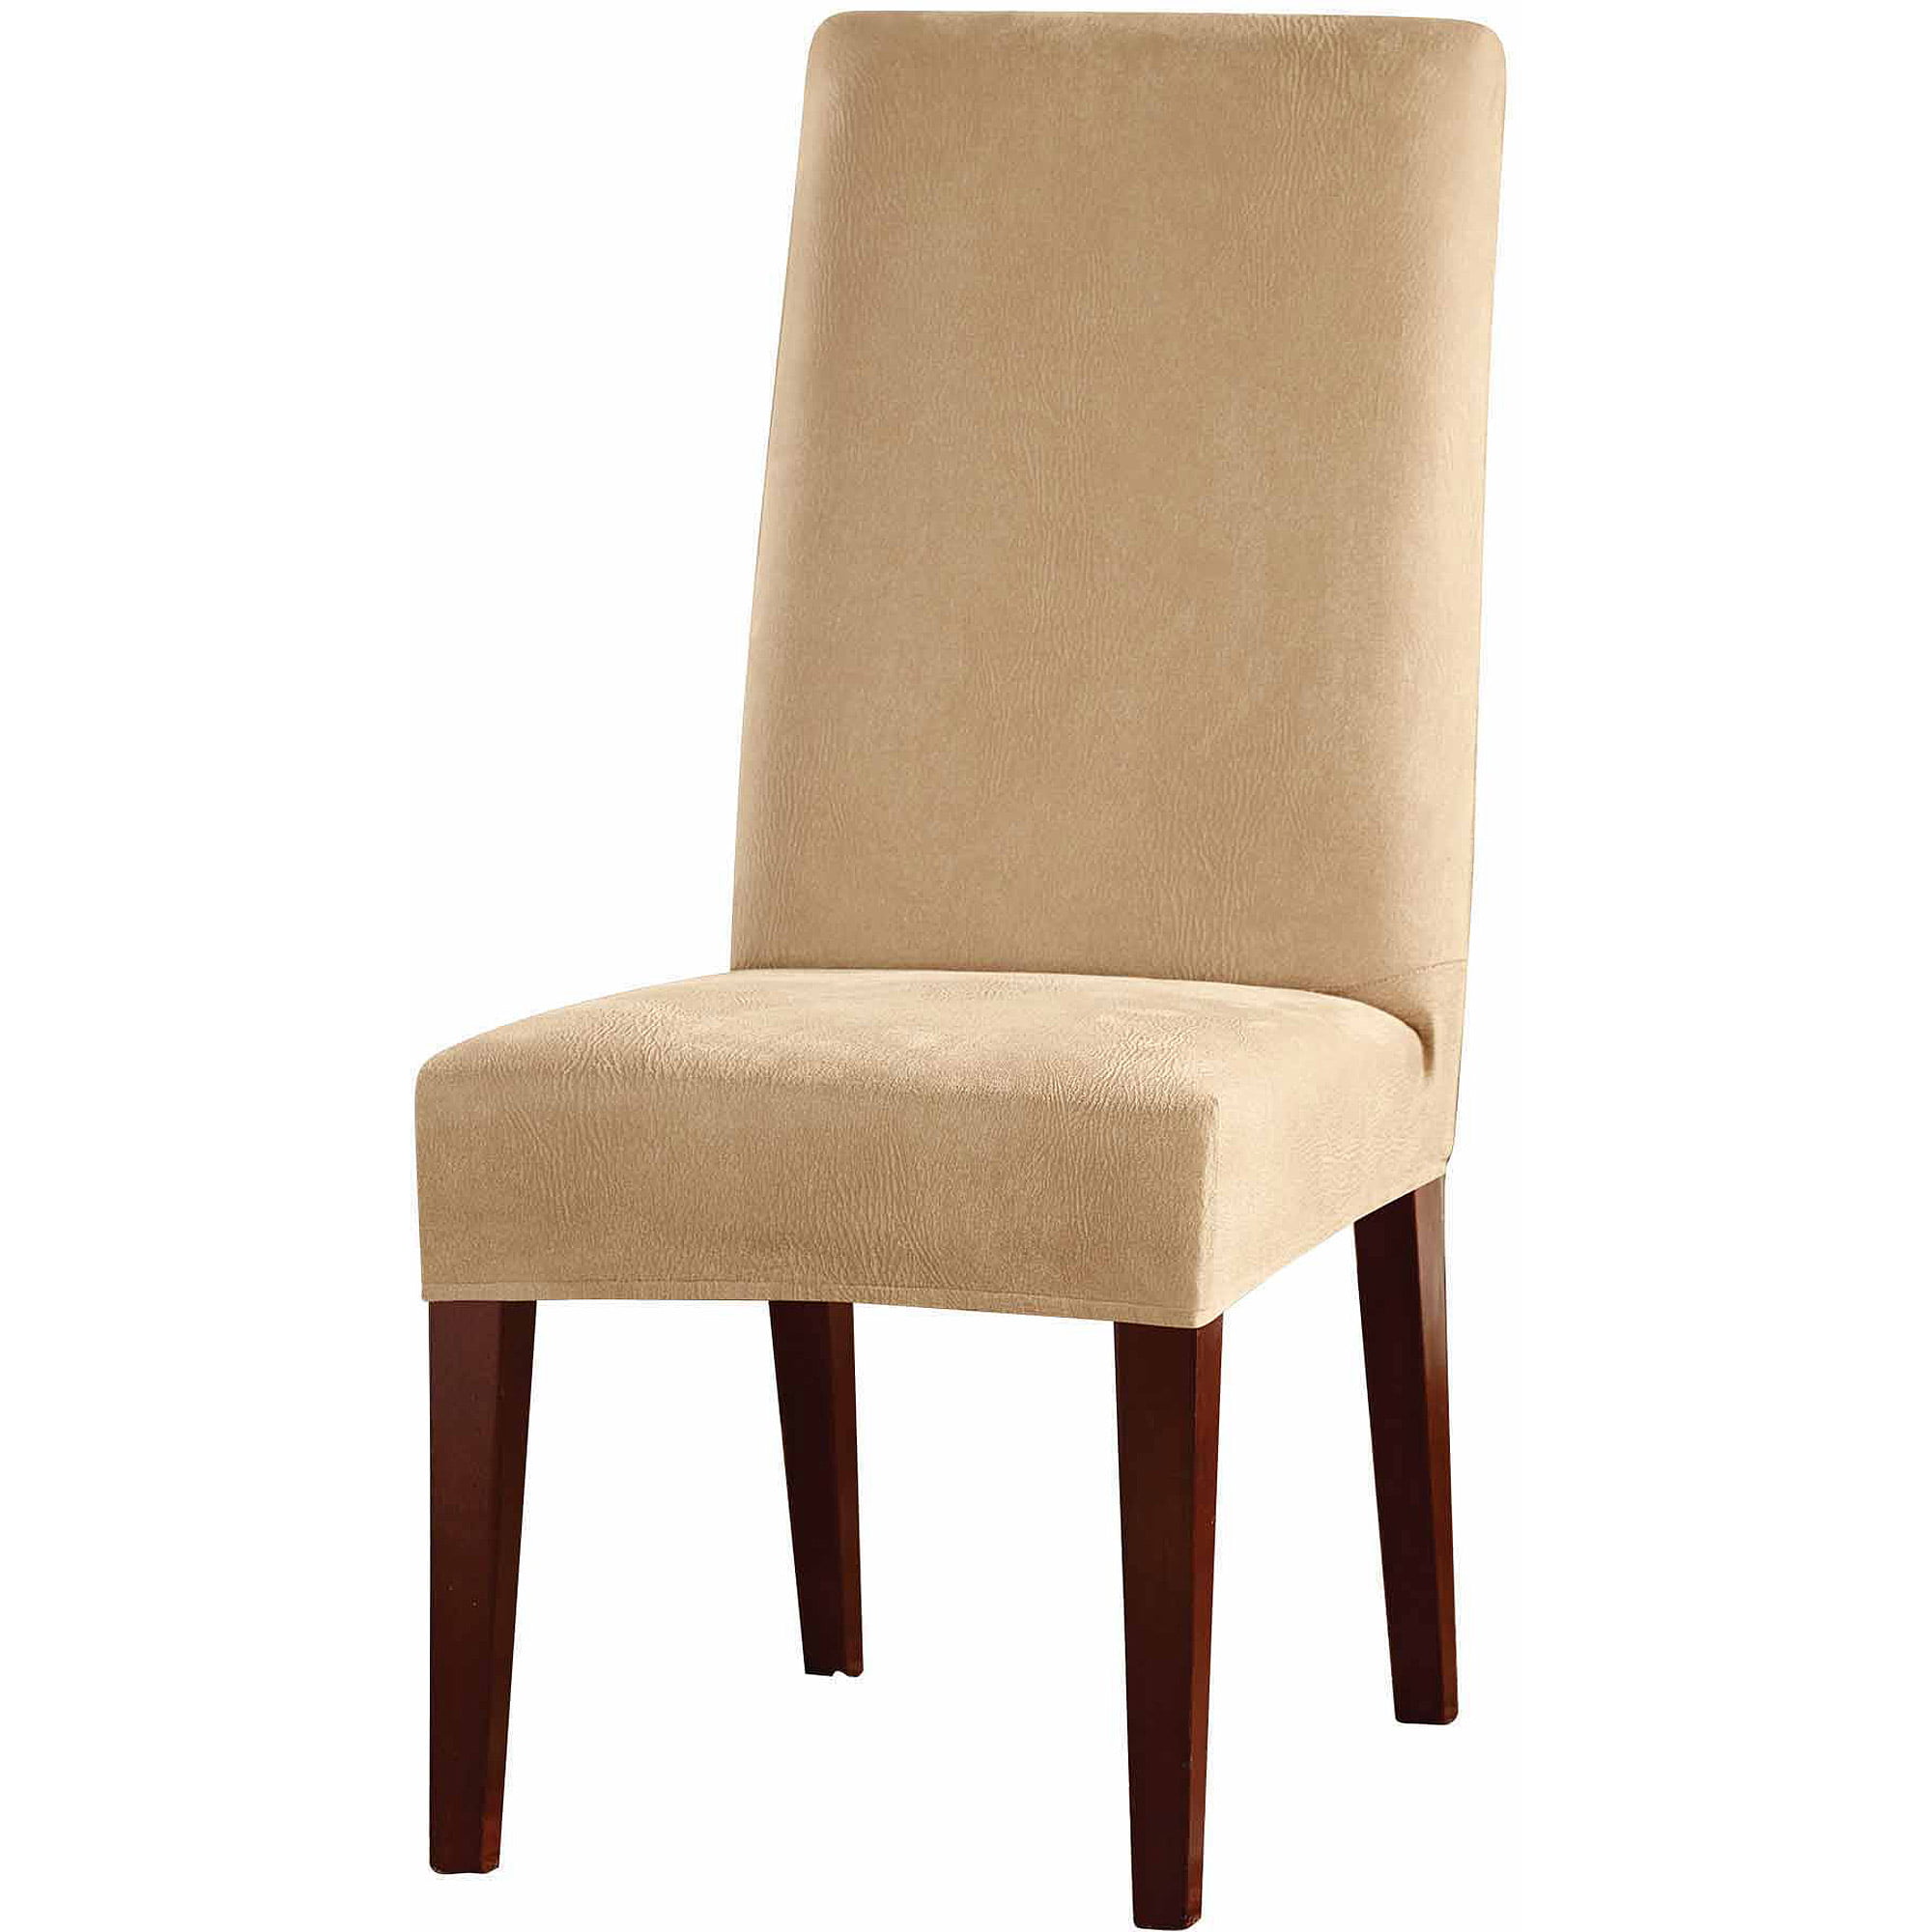 Sure Fit Stretch Leather Short Dining Room Chair Slipcover Camel